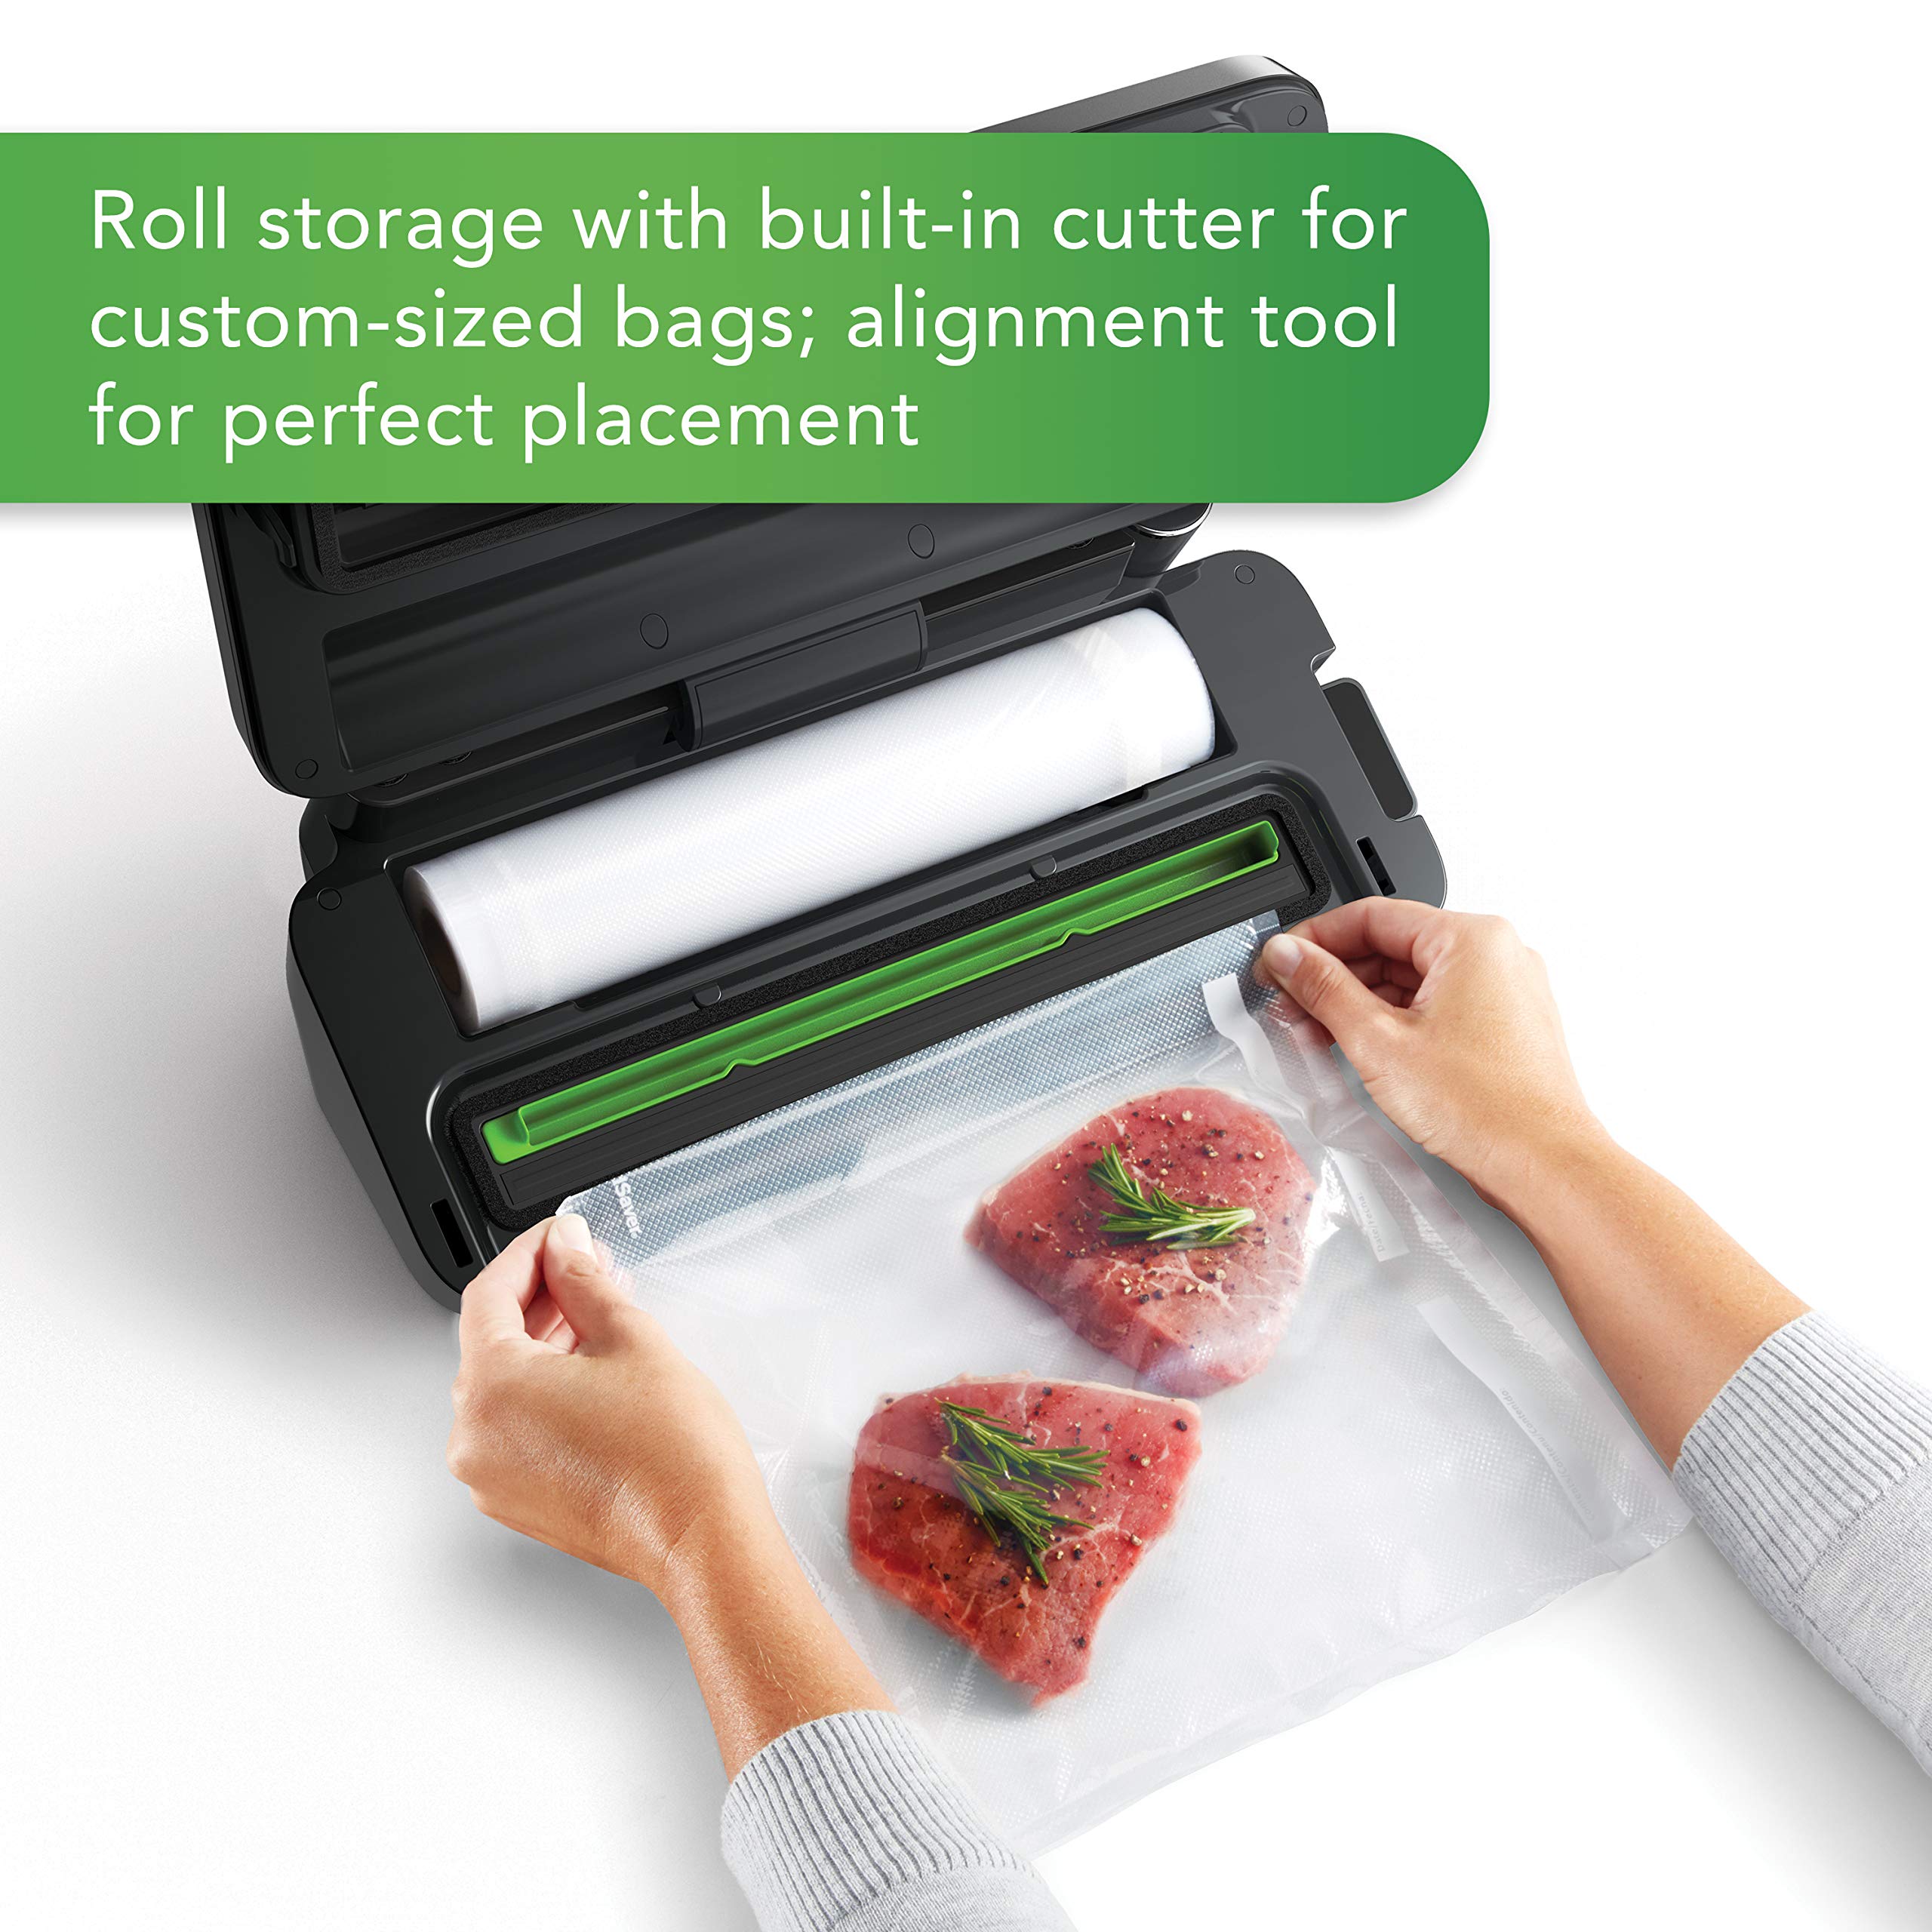 FoodSaver VS3150 Multi Use Vacuum Sealing Food Preservation System with Additional Roll Charcoal Stainless Steel Black - image 4 of 7